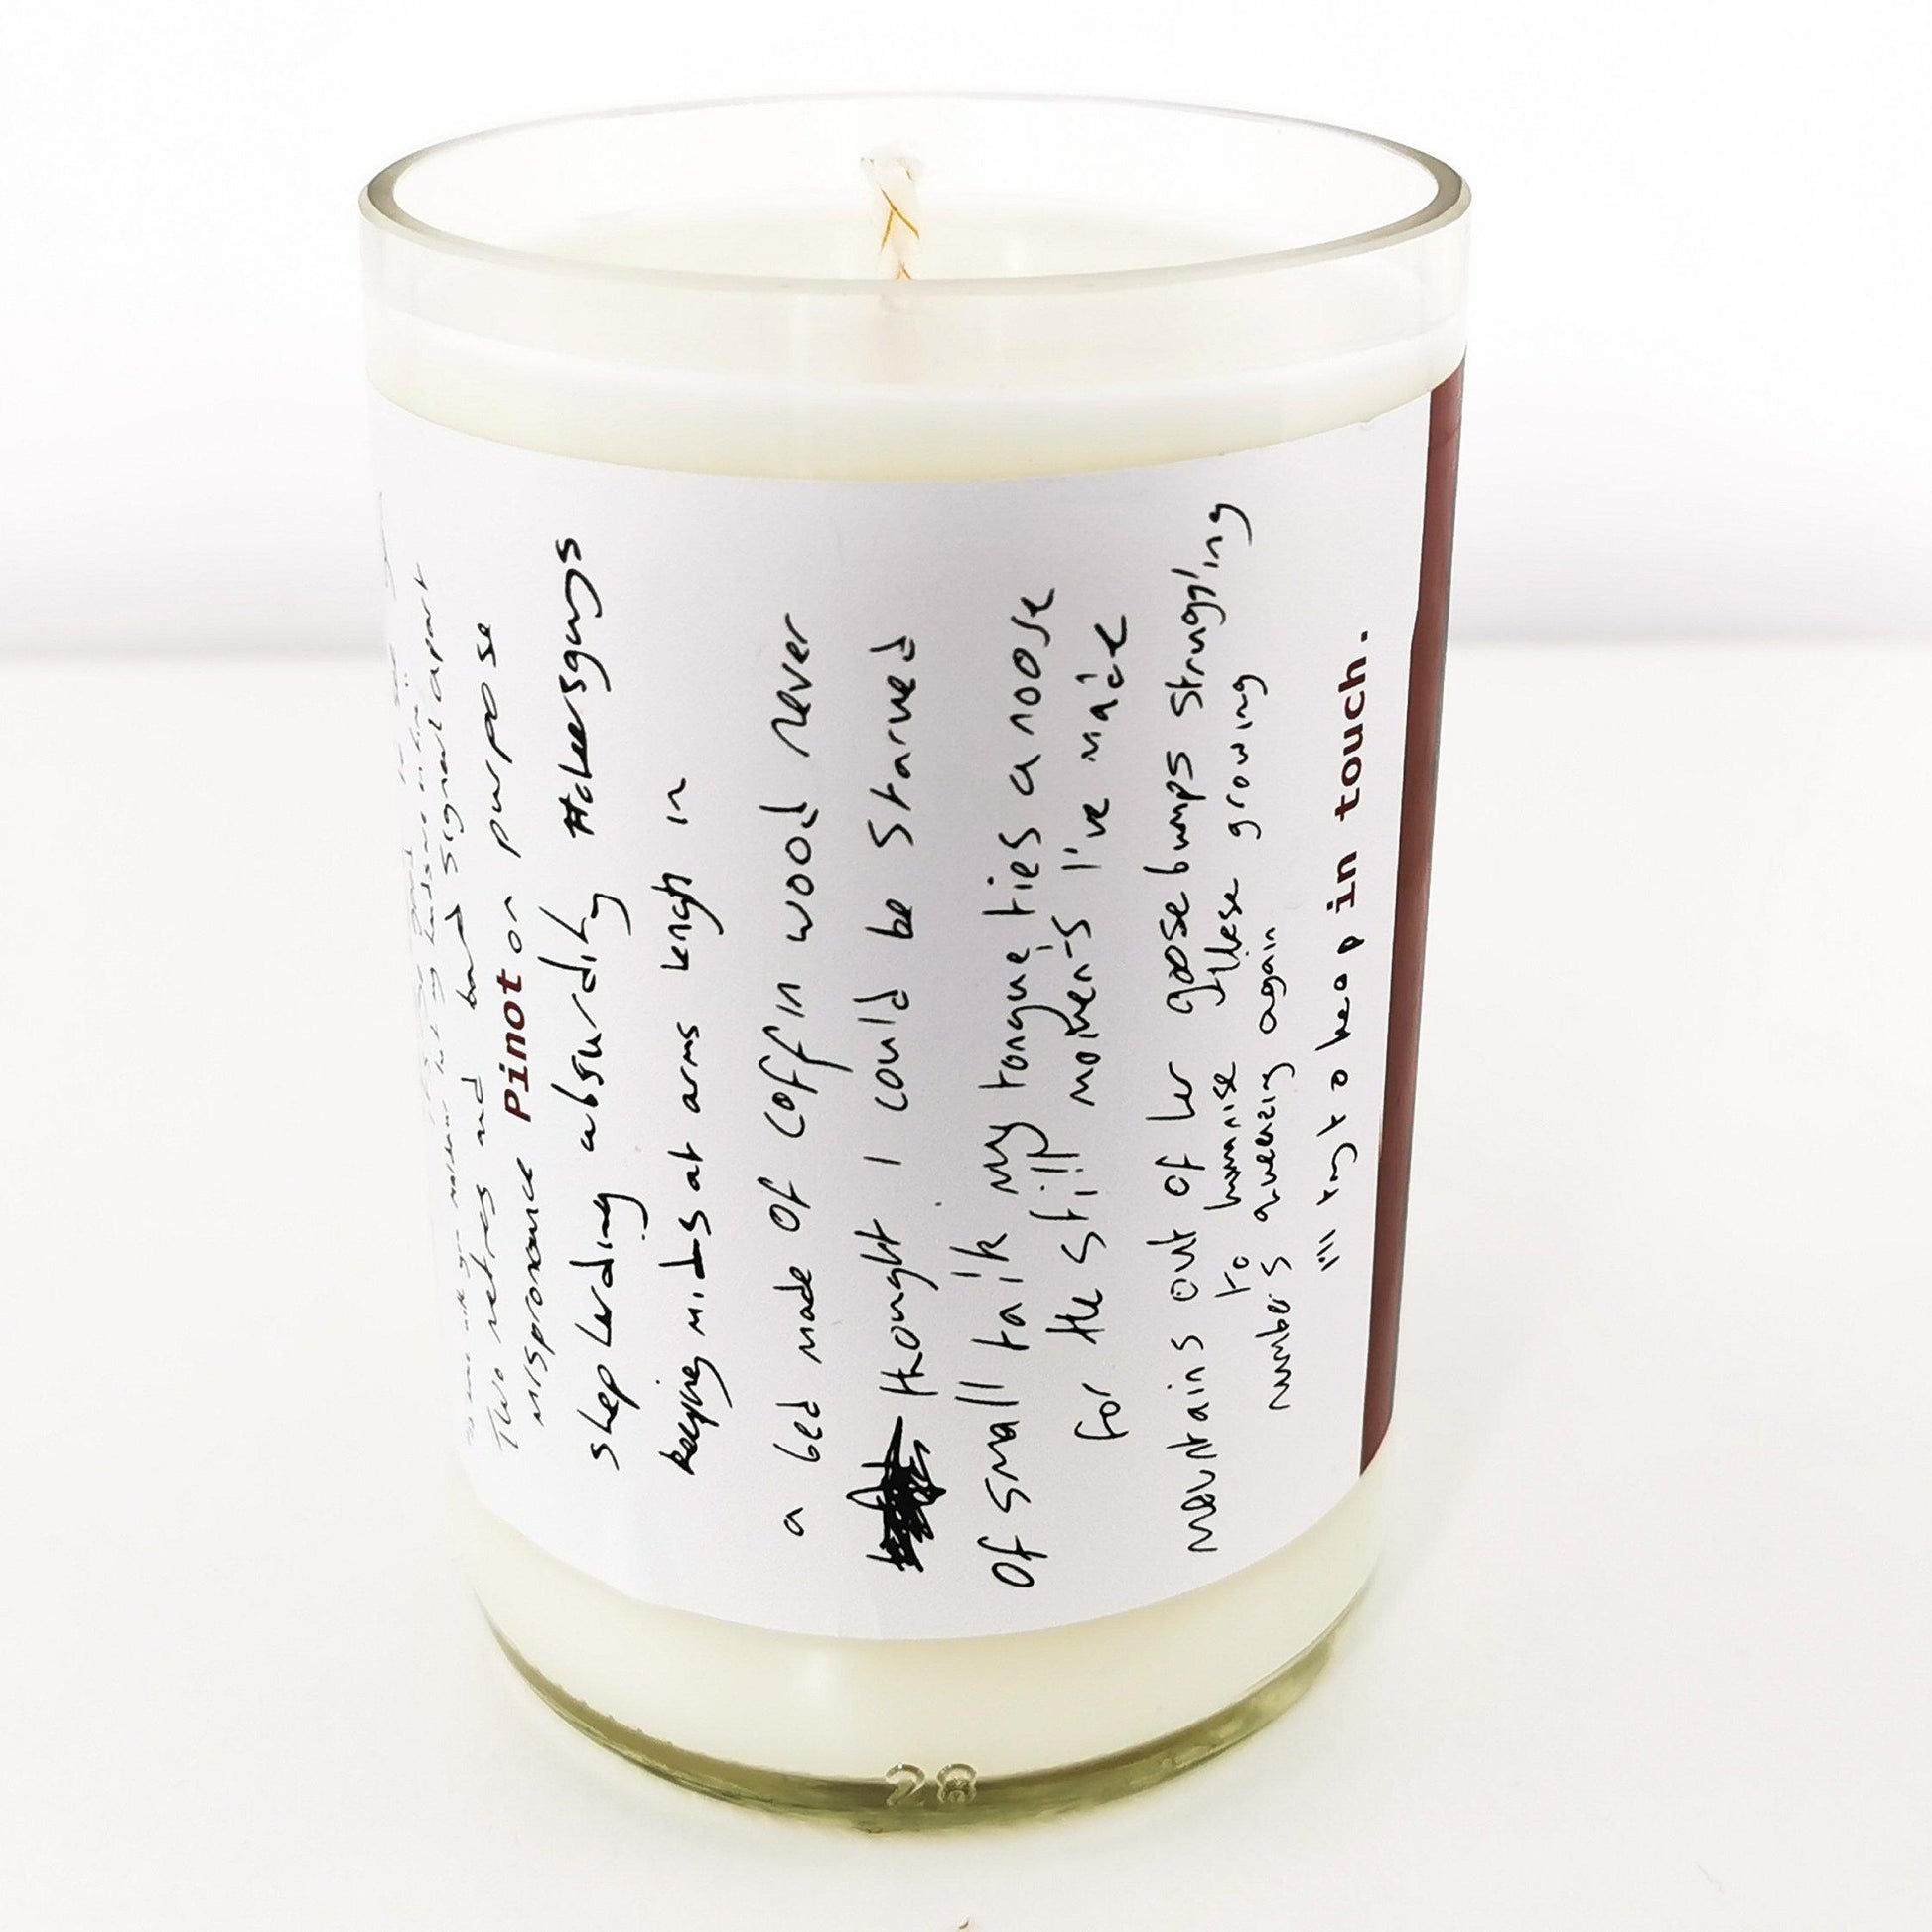 Pilton Pinot Skin Contact Cider Bottle Candle Cider Bottle Candles Adhock Homeware